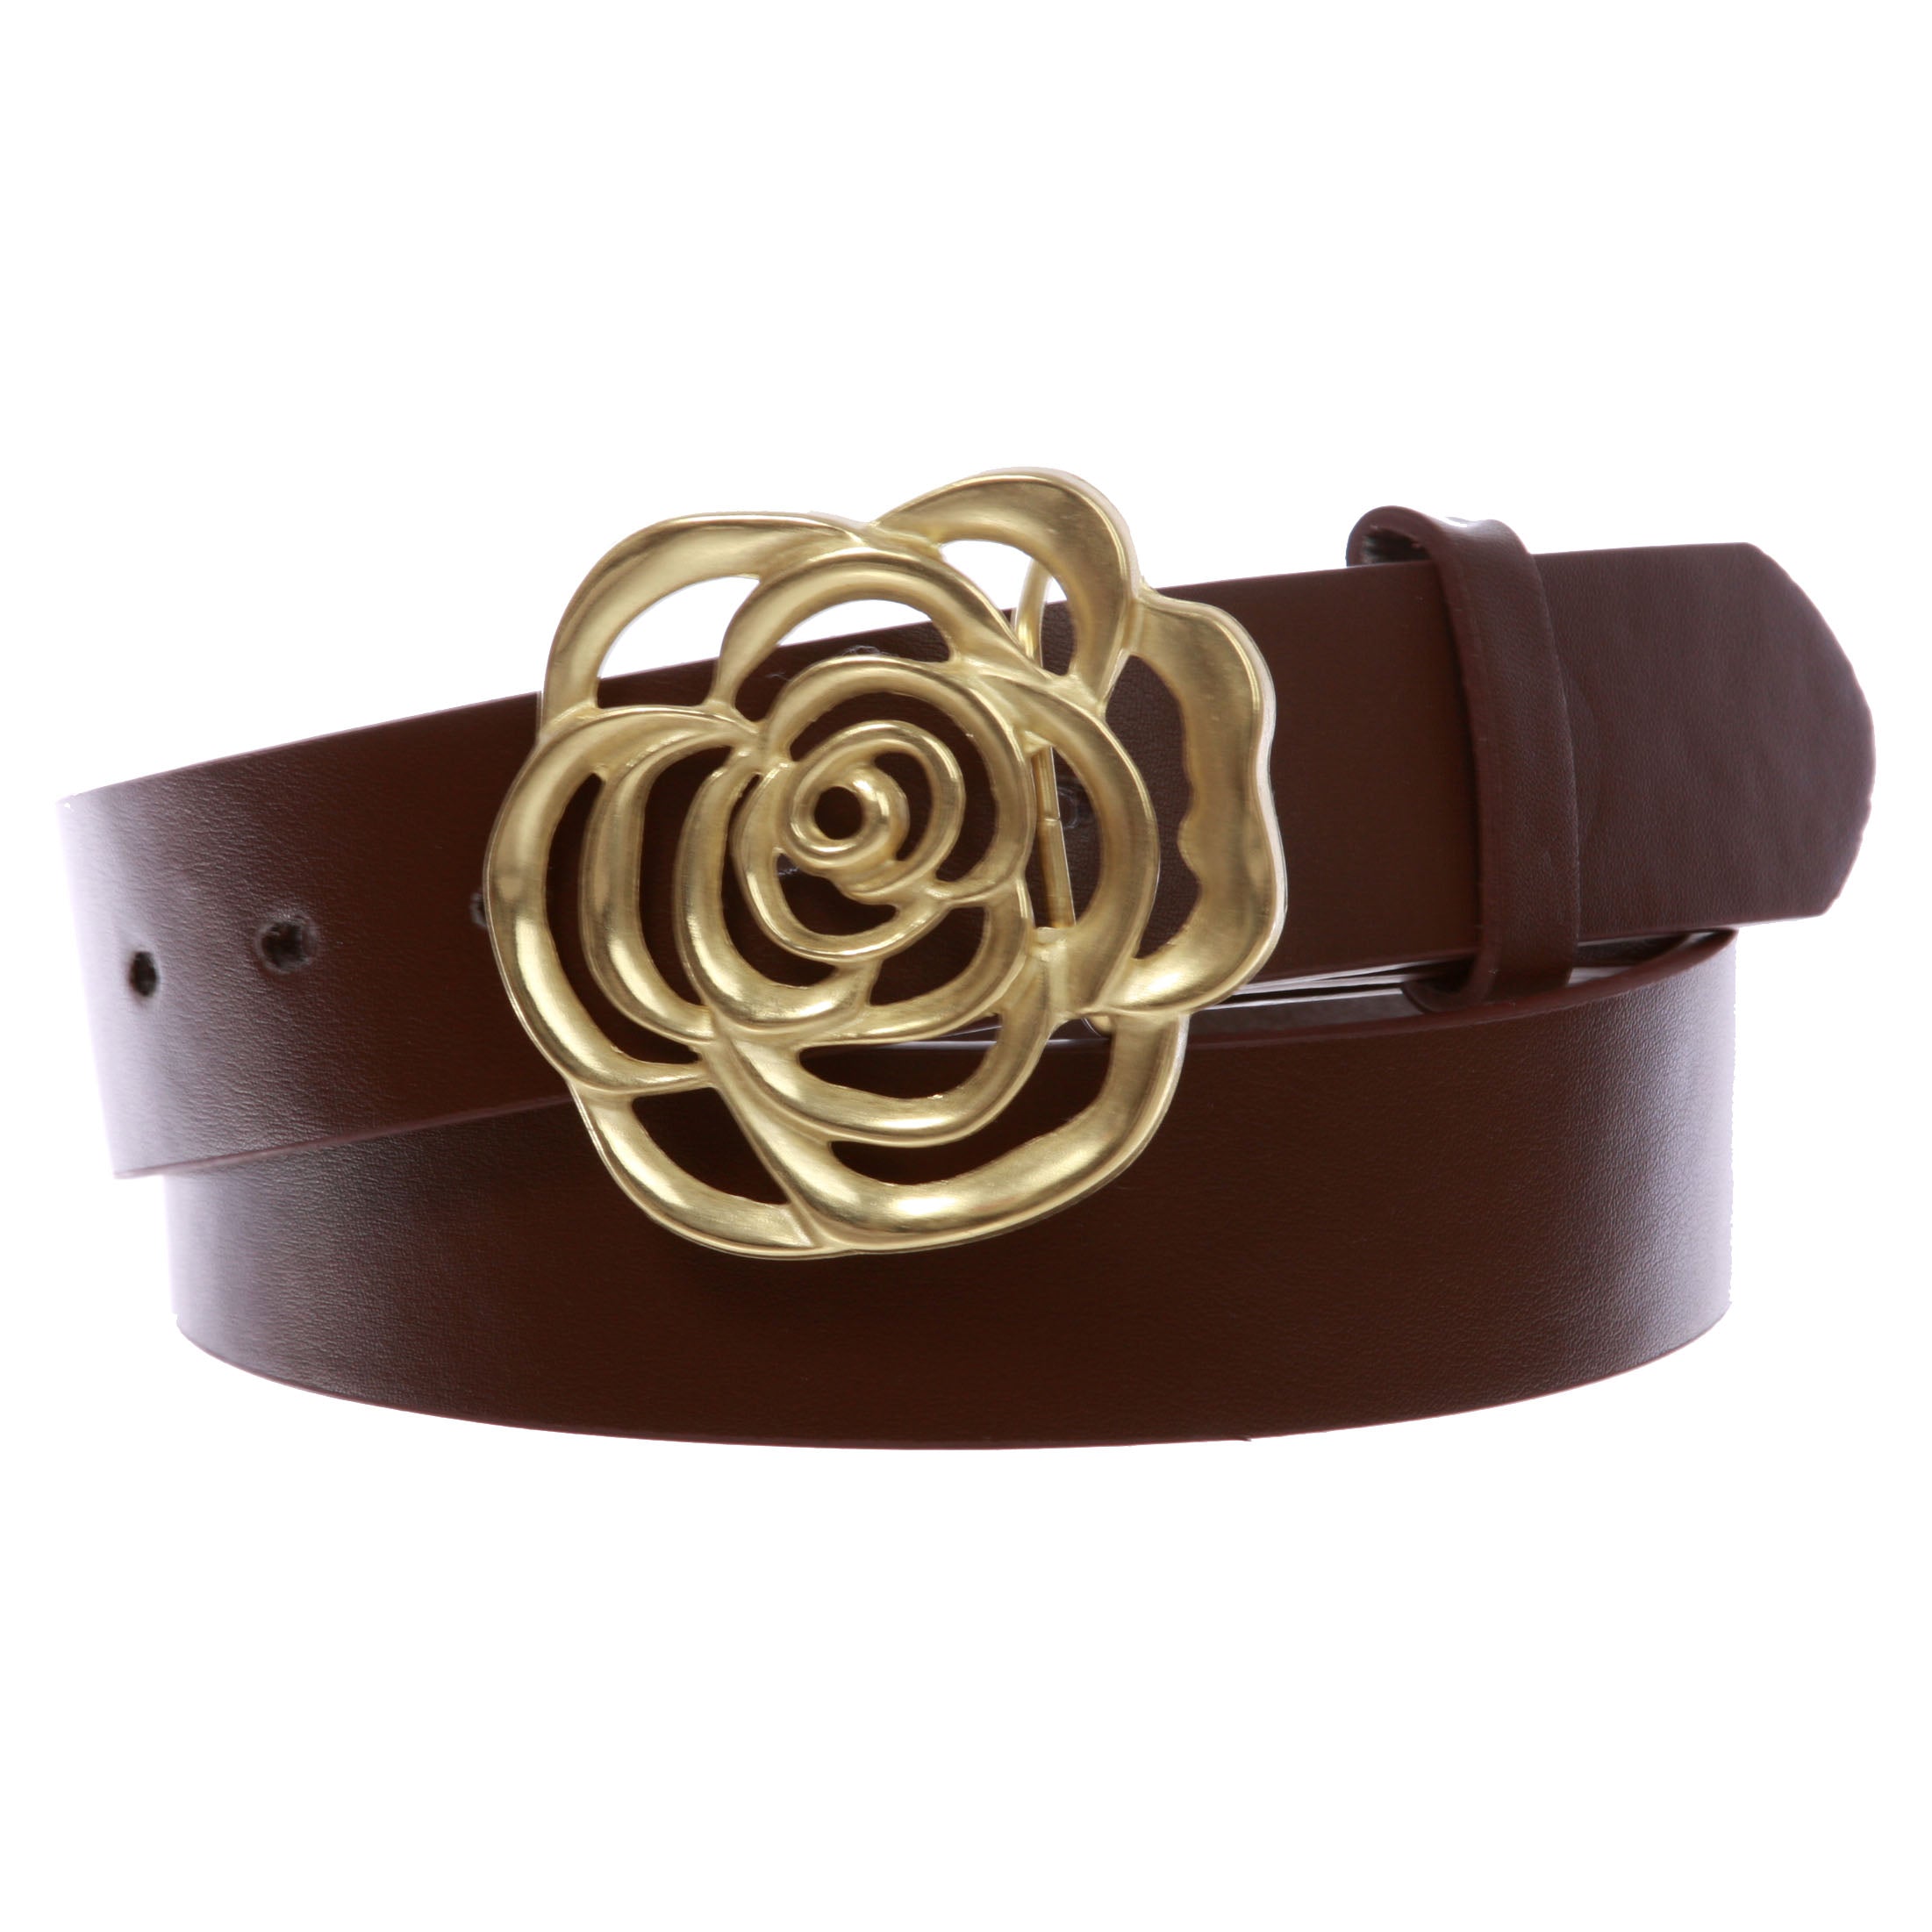 1 1/2" Women's Snap On Western Engraving Hollow Out Perforated Rose Flower Buckle Belt